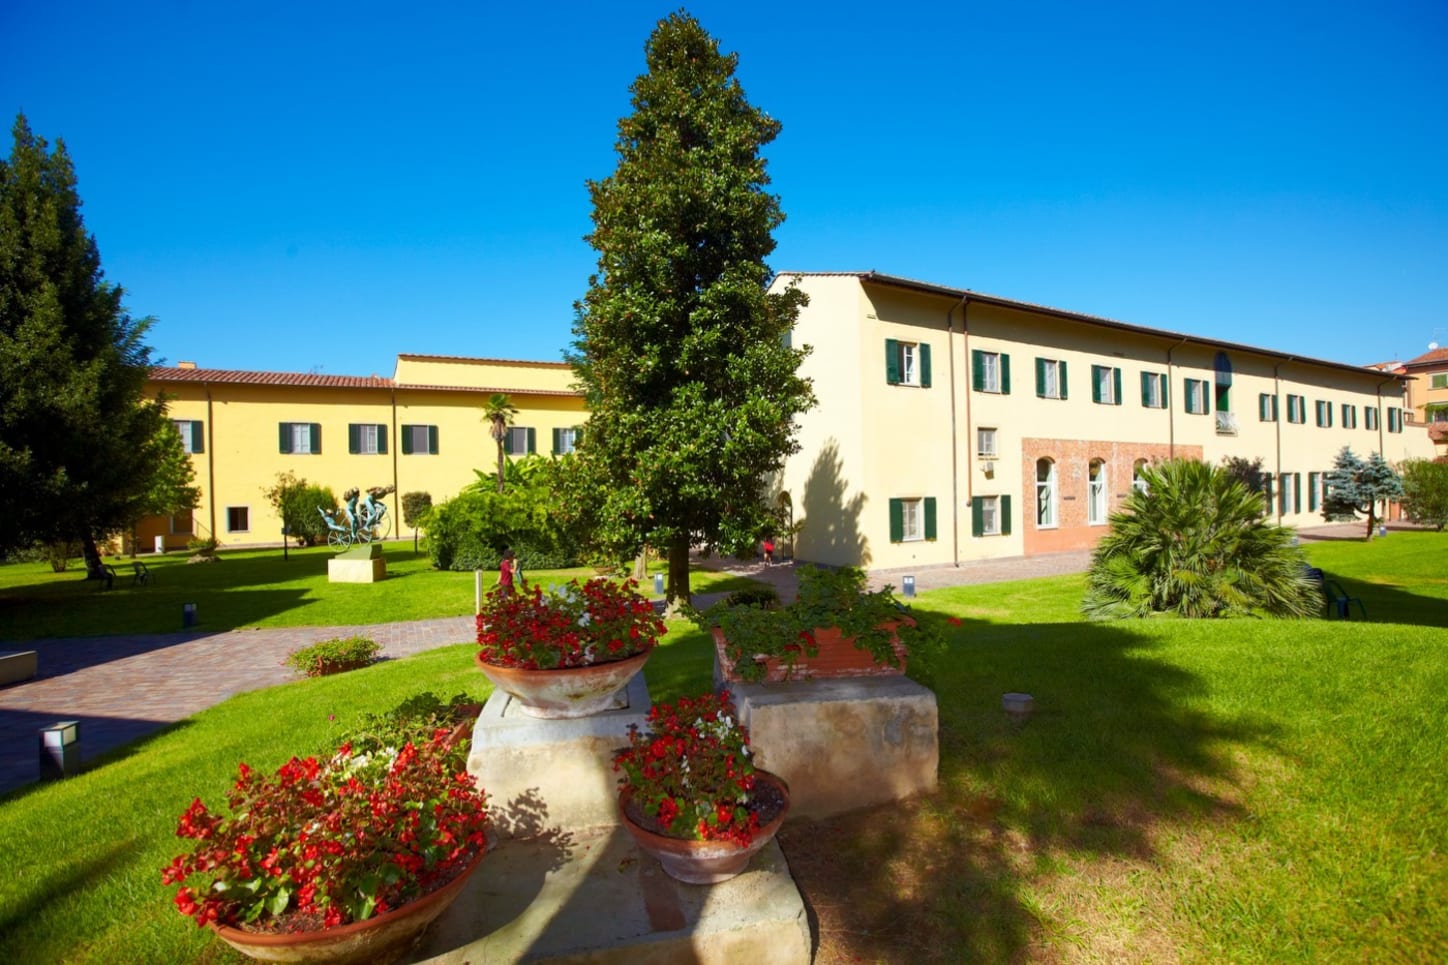 Scuola Superiore Sant’Anna PhD in Management Innovation, Sustainability and Healthcare